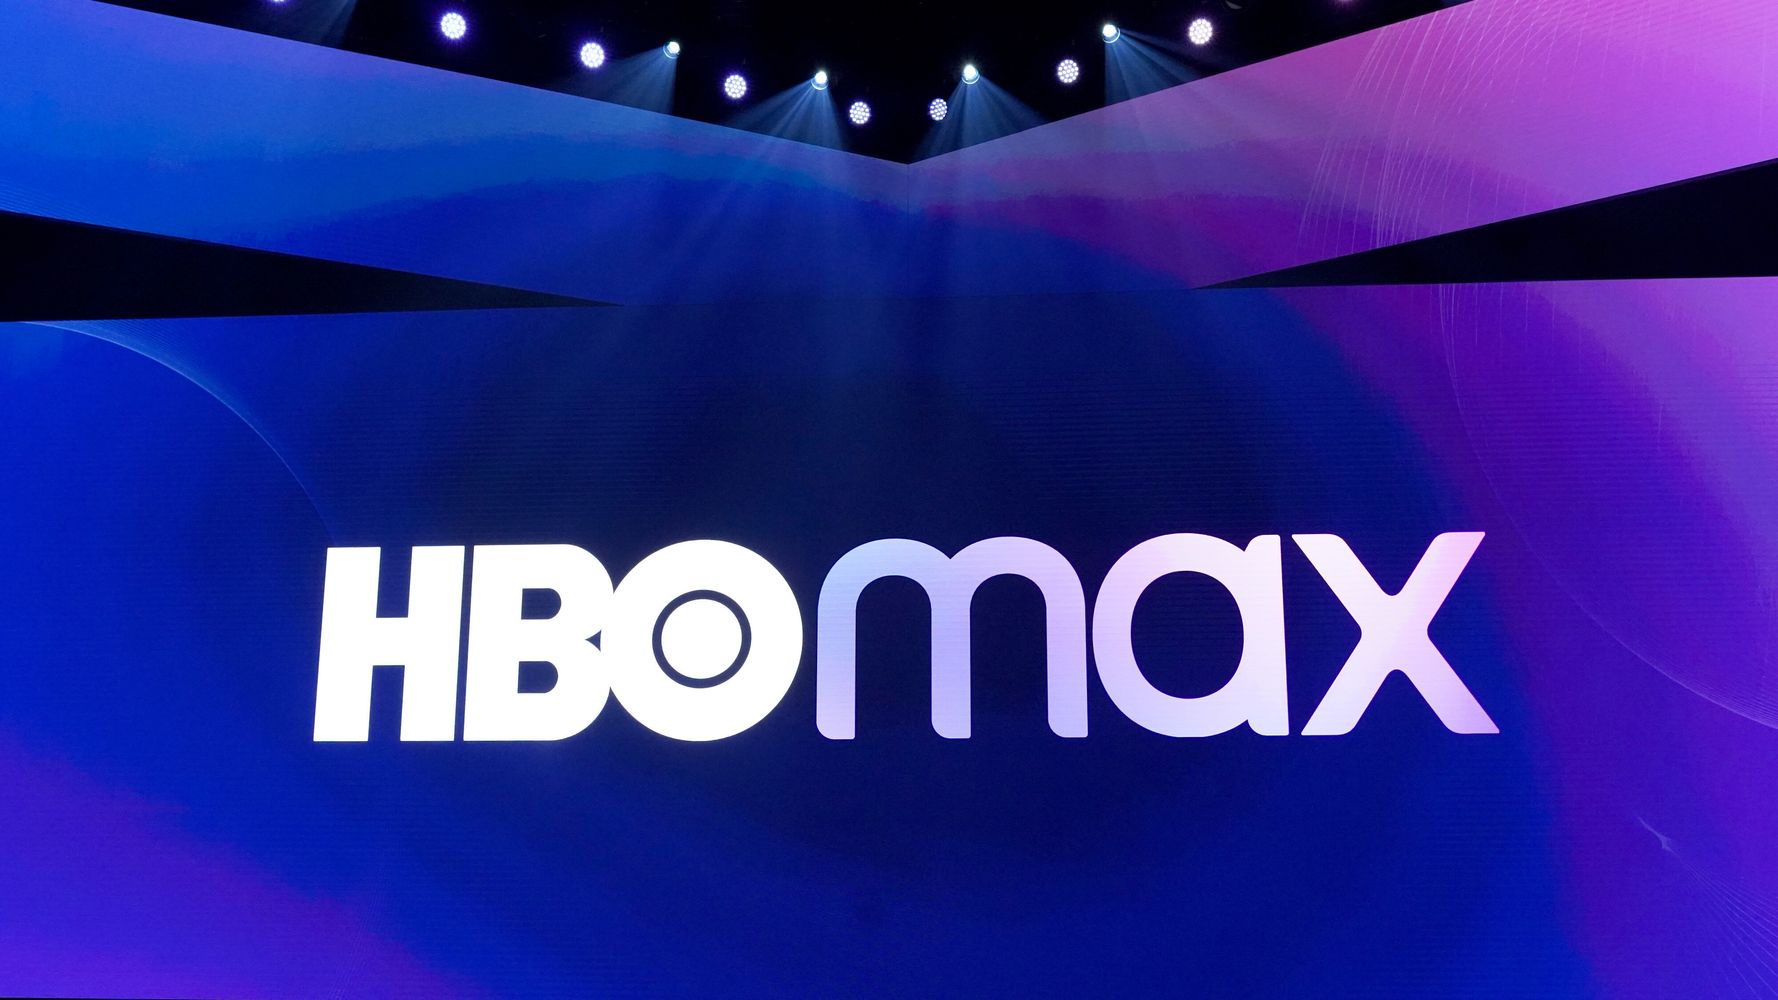 HBO Max Debuts With A Magical Surprise, But Is It Enough?